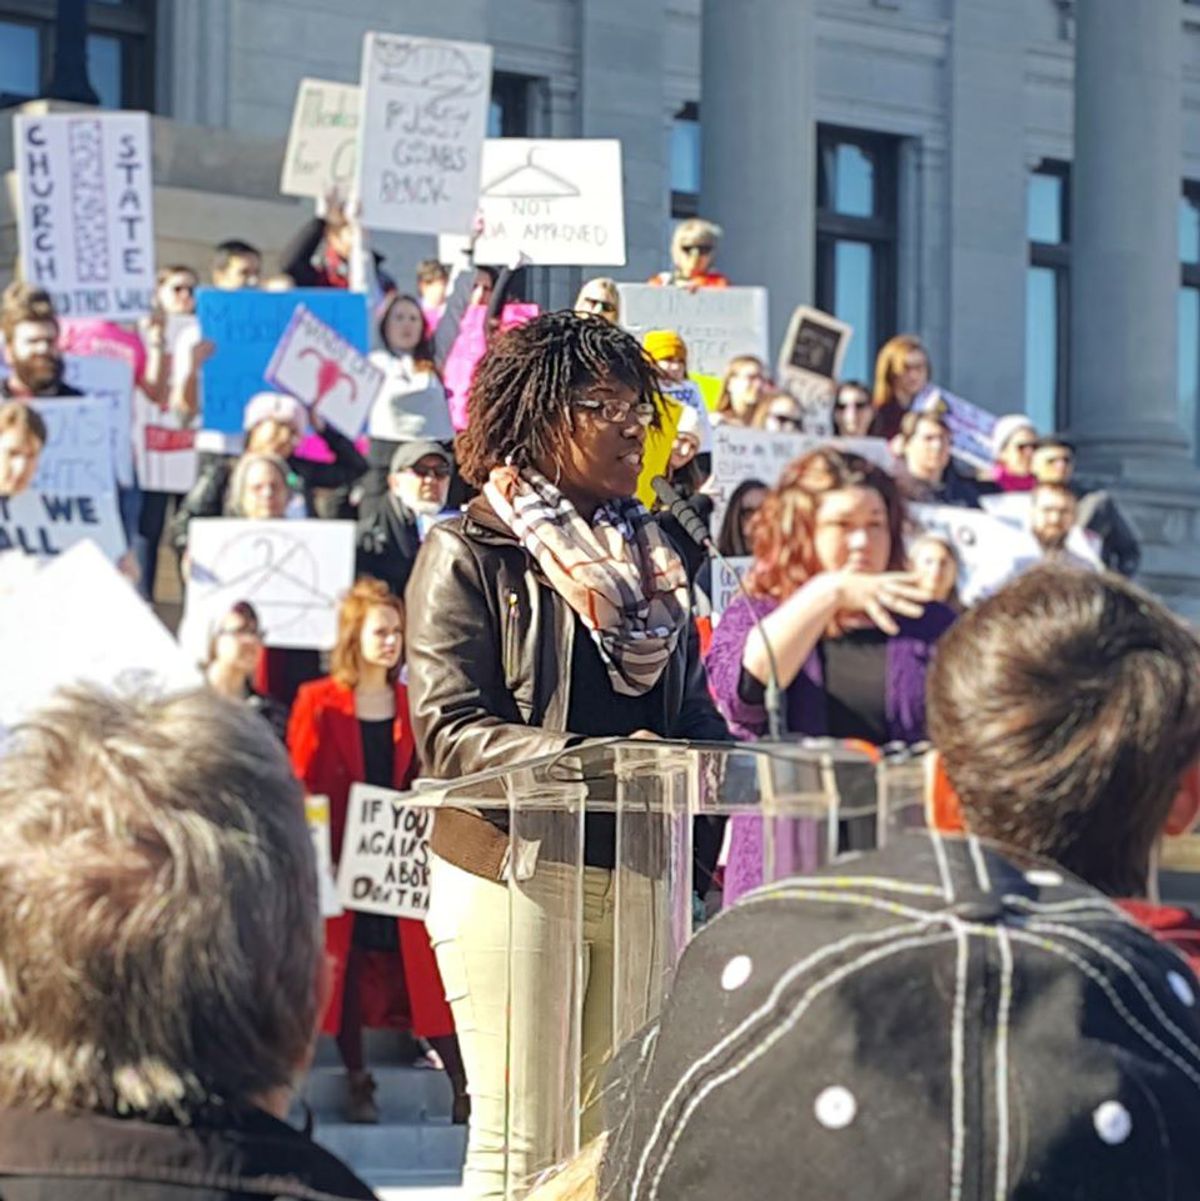 Rae Nelson Makes Arkansas History As First Black Trans Woman To Speak At Annual Reproductive Justice Rally